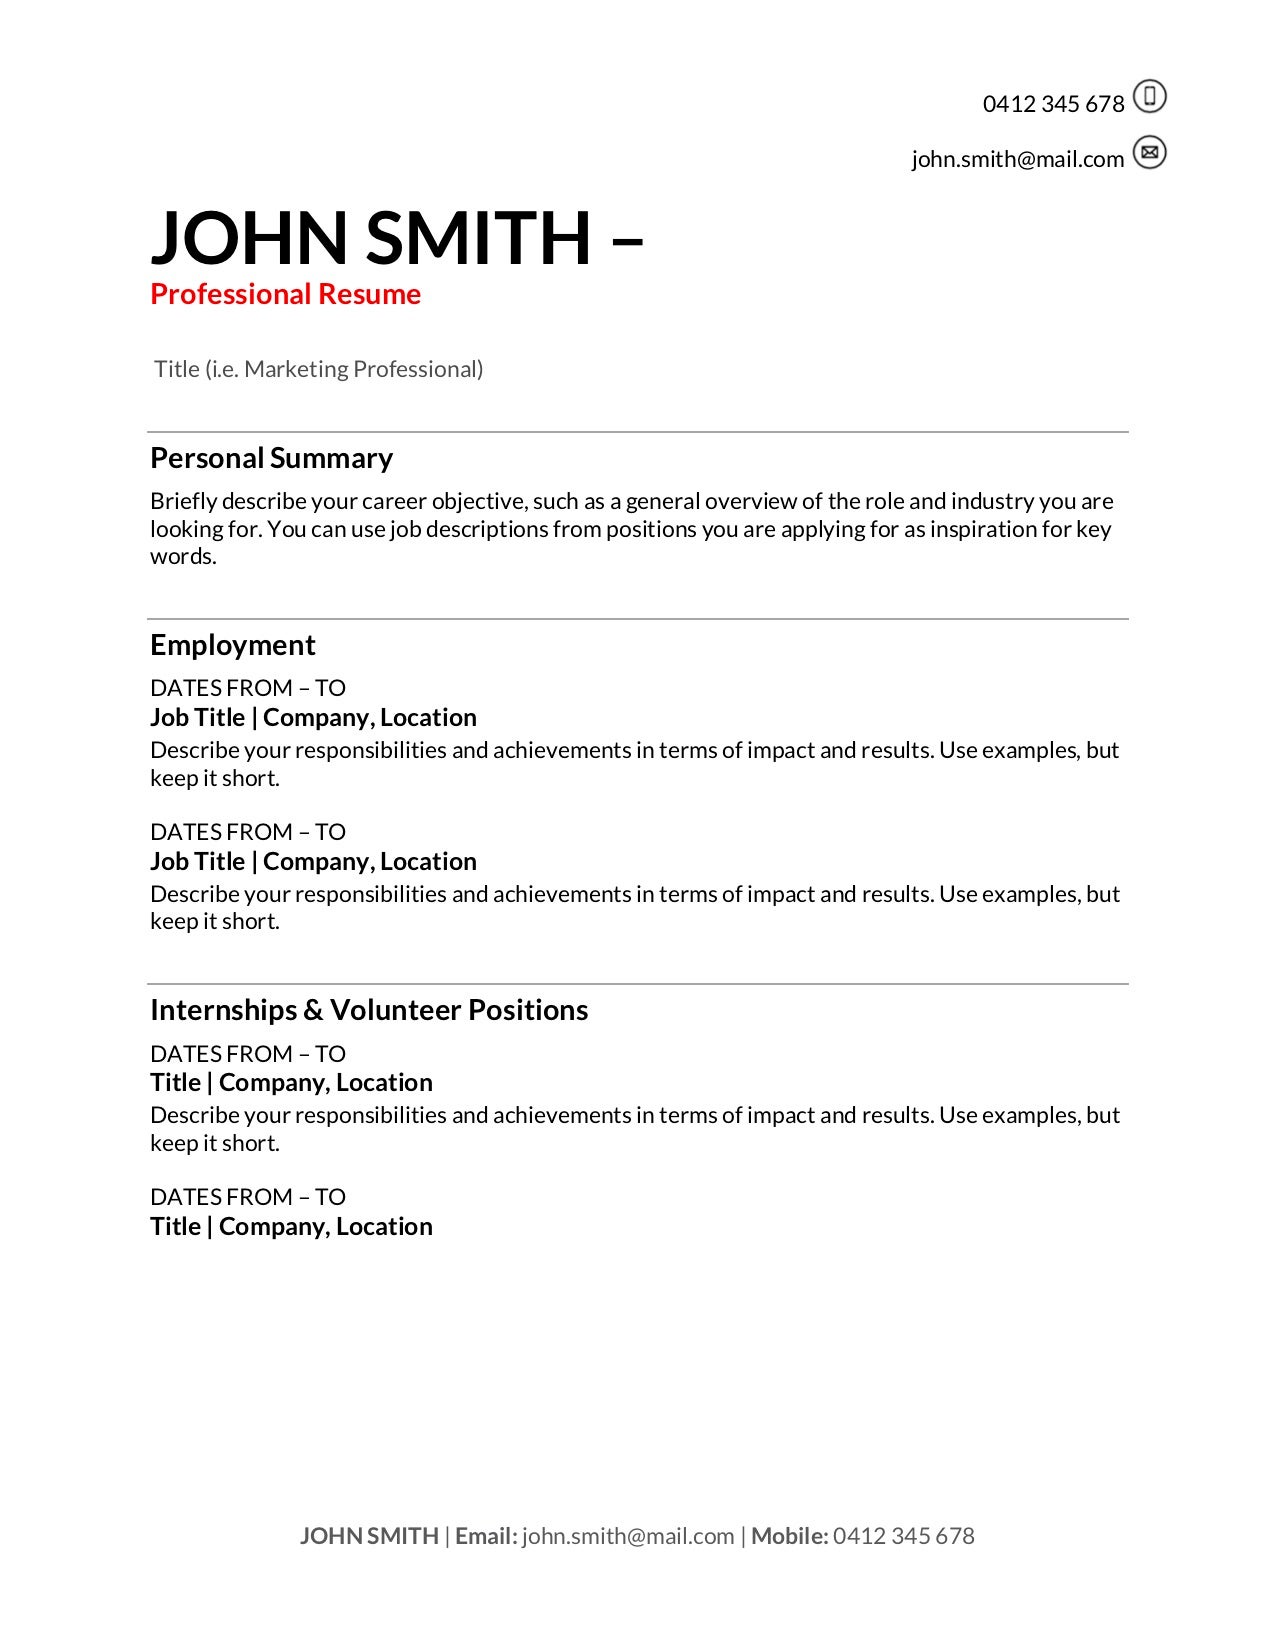 free template for a simple resume